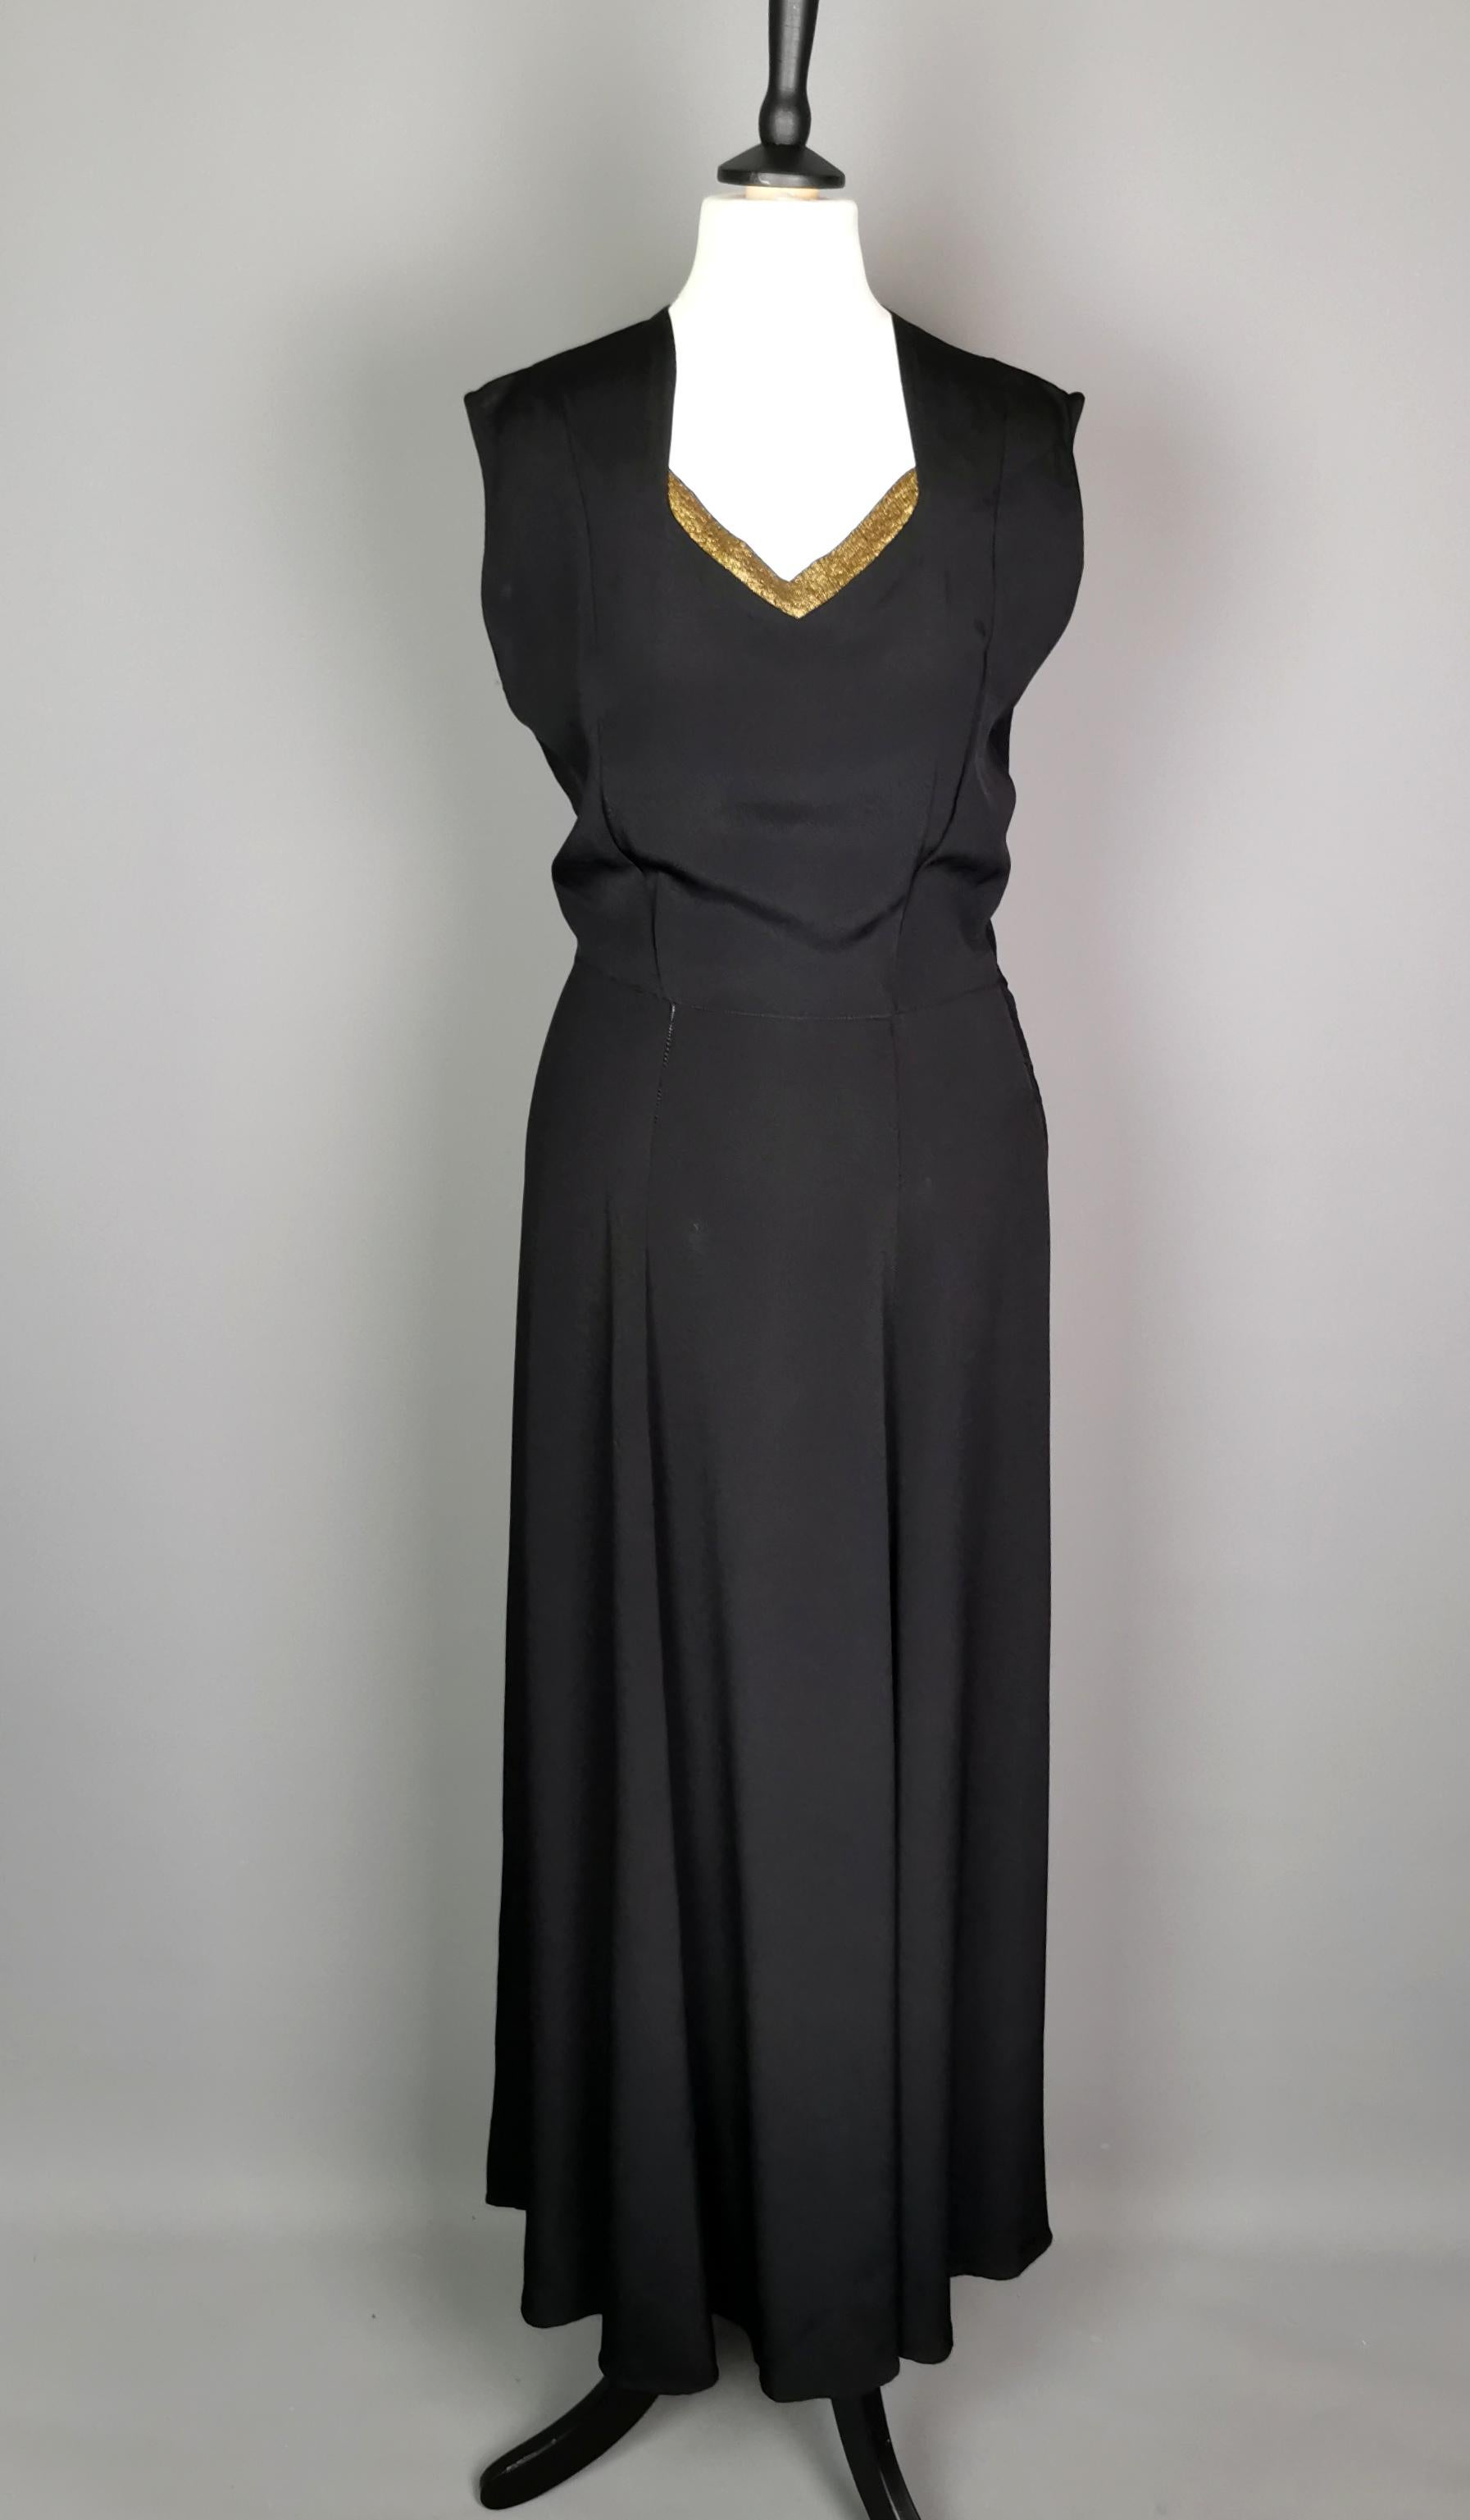 Vintage 1930s Black rayon crepe bombshell dress, gold lame, evening gown  For Sale 3